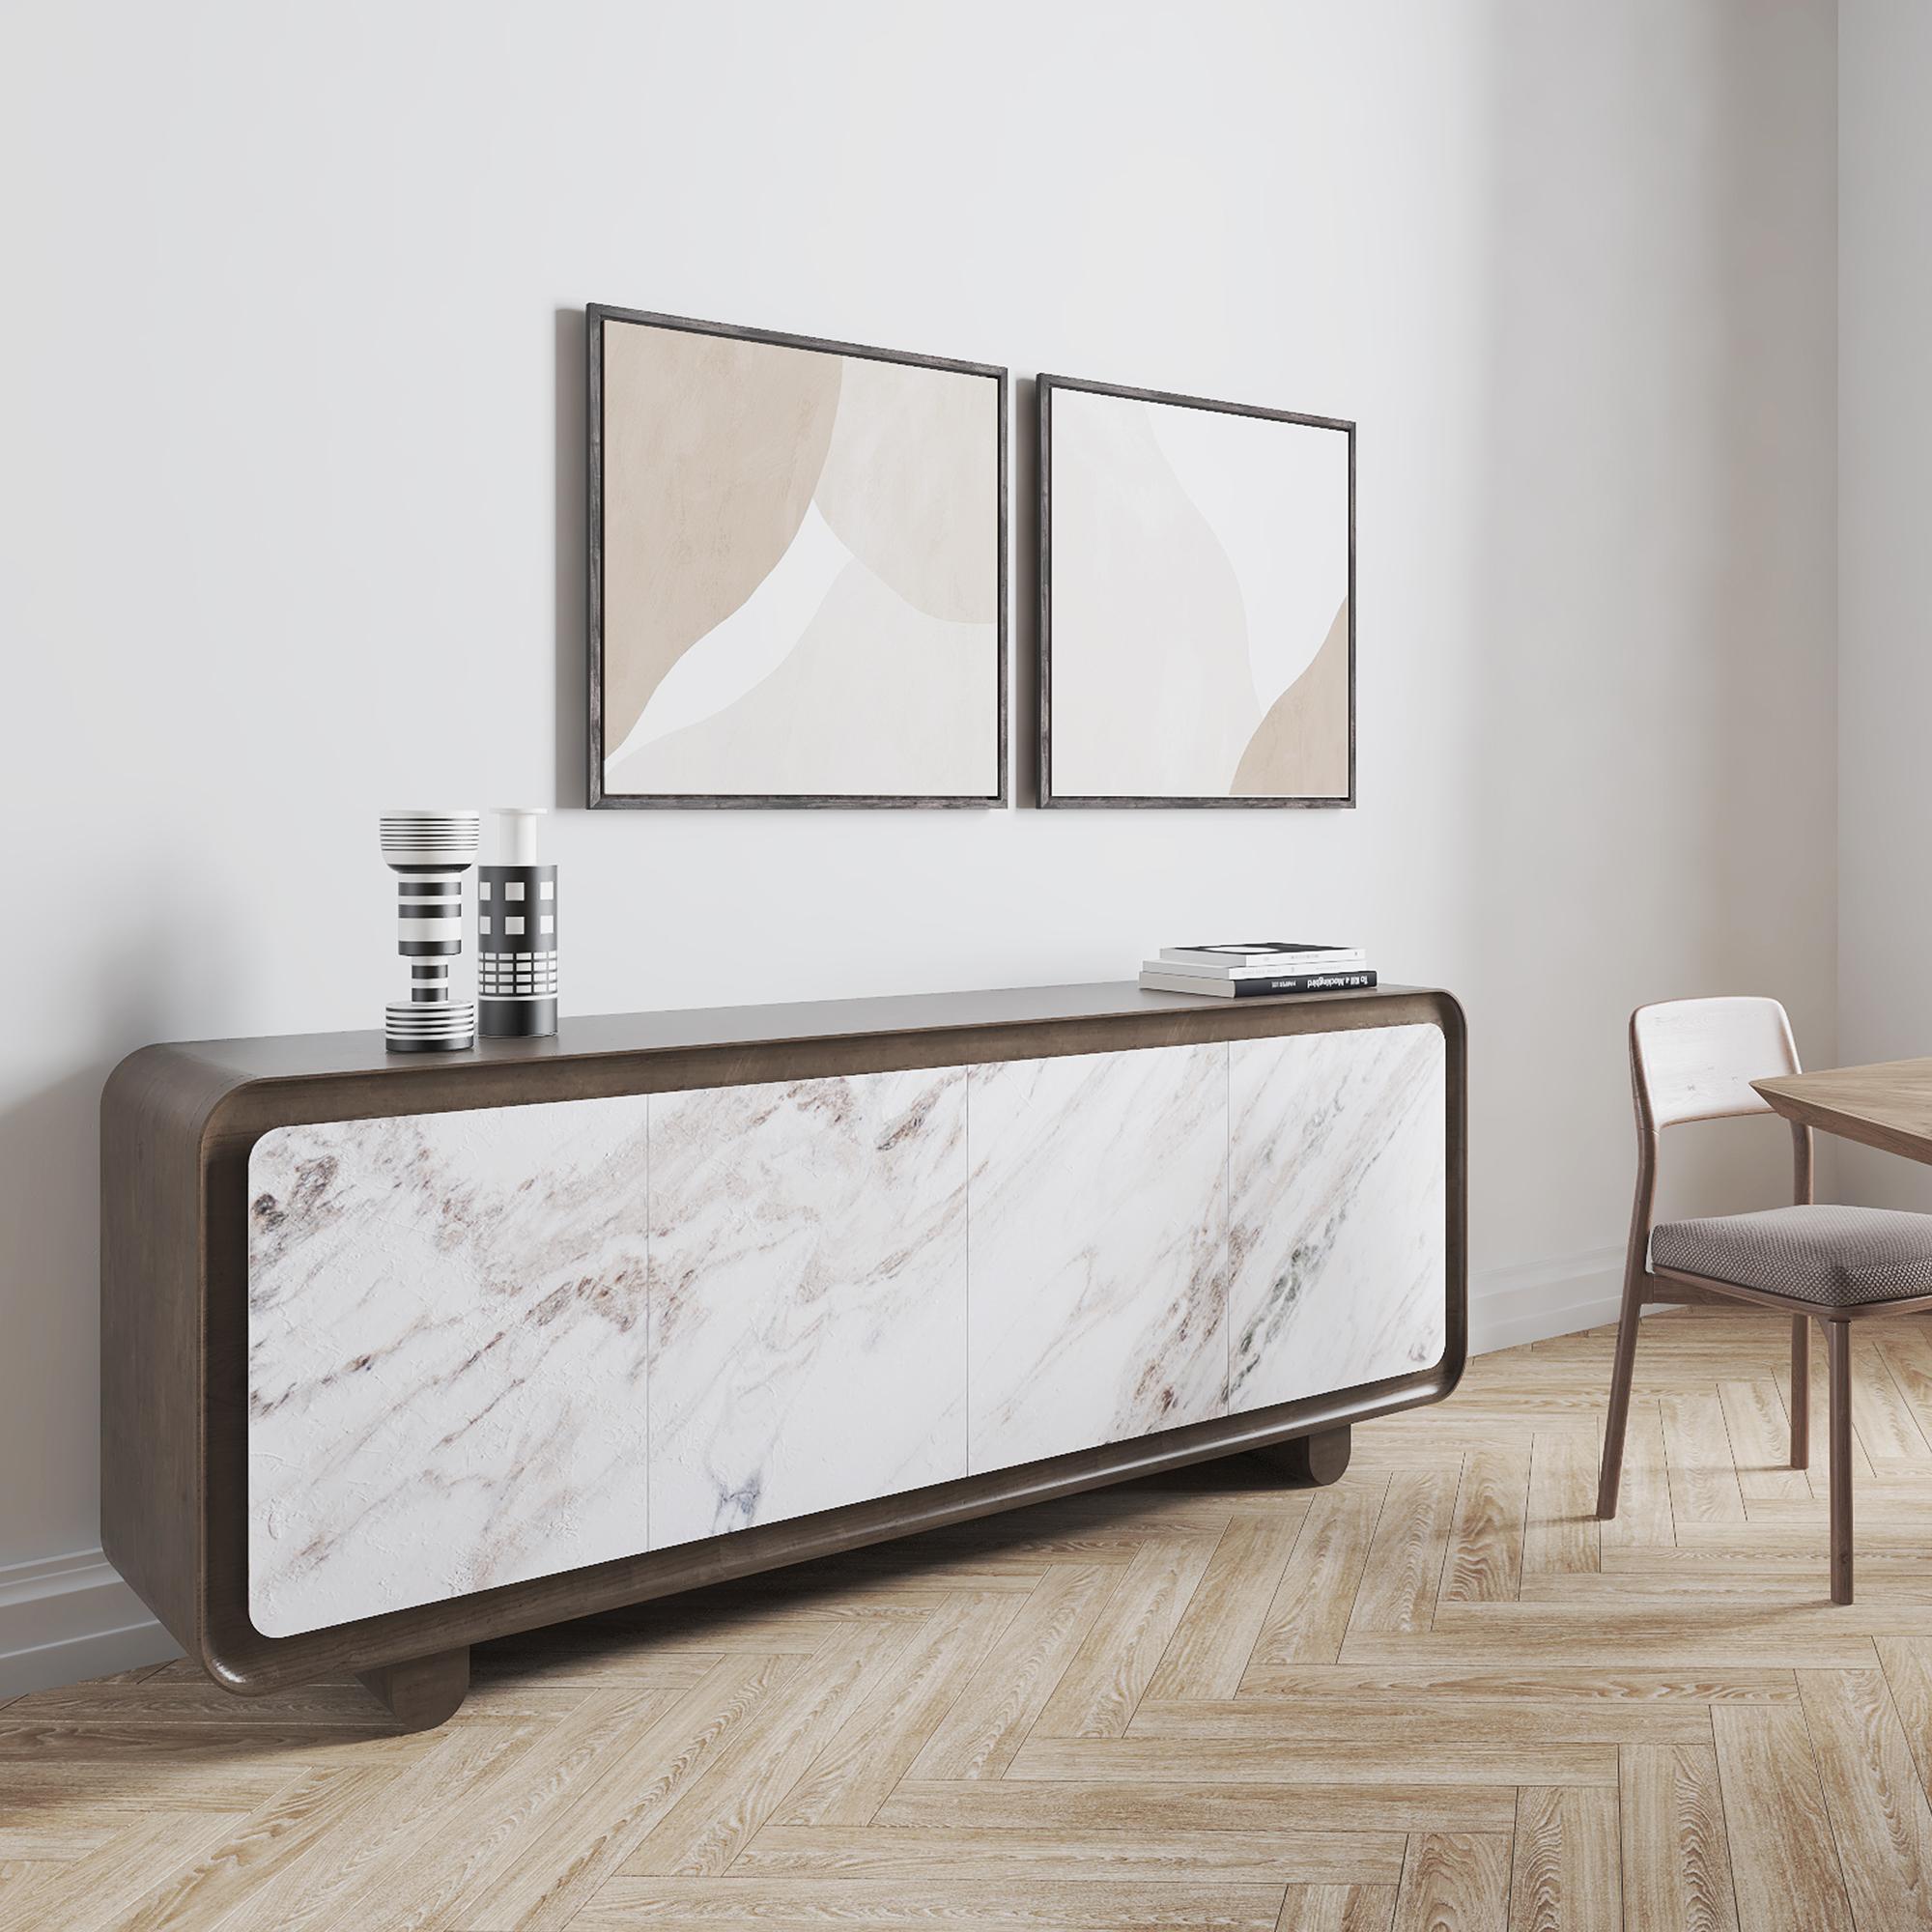 Modern, Contemporary, 21st Century, Marble, Wood, Flow Sideboard

Wood sideboard with marble doors.